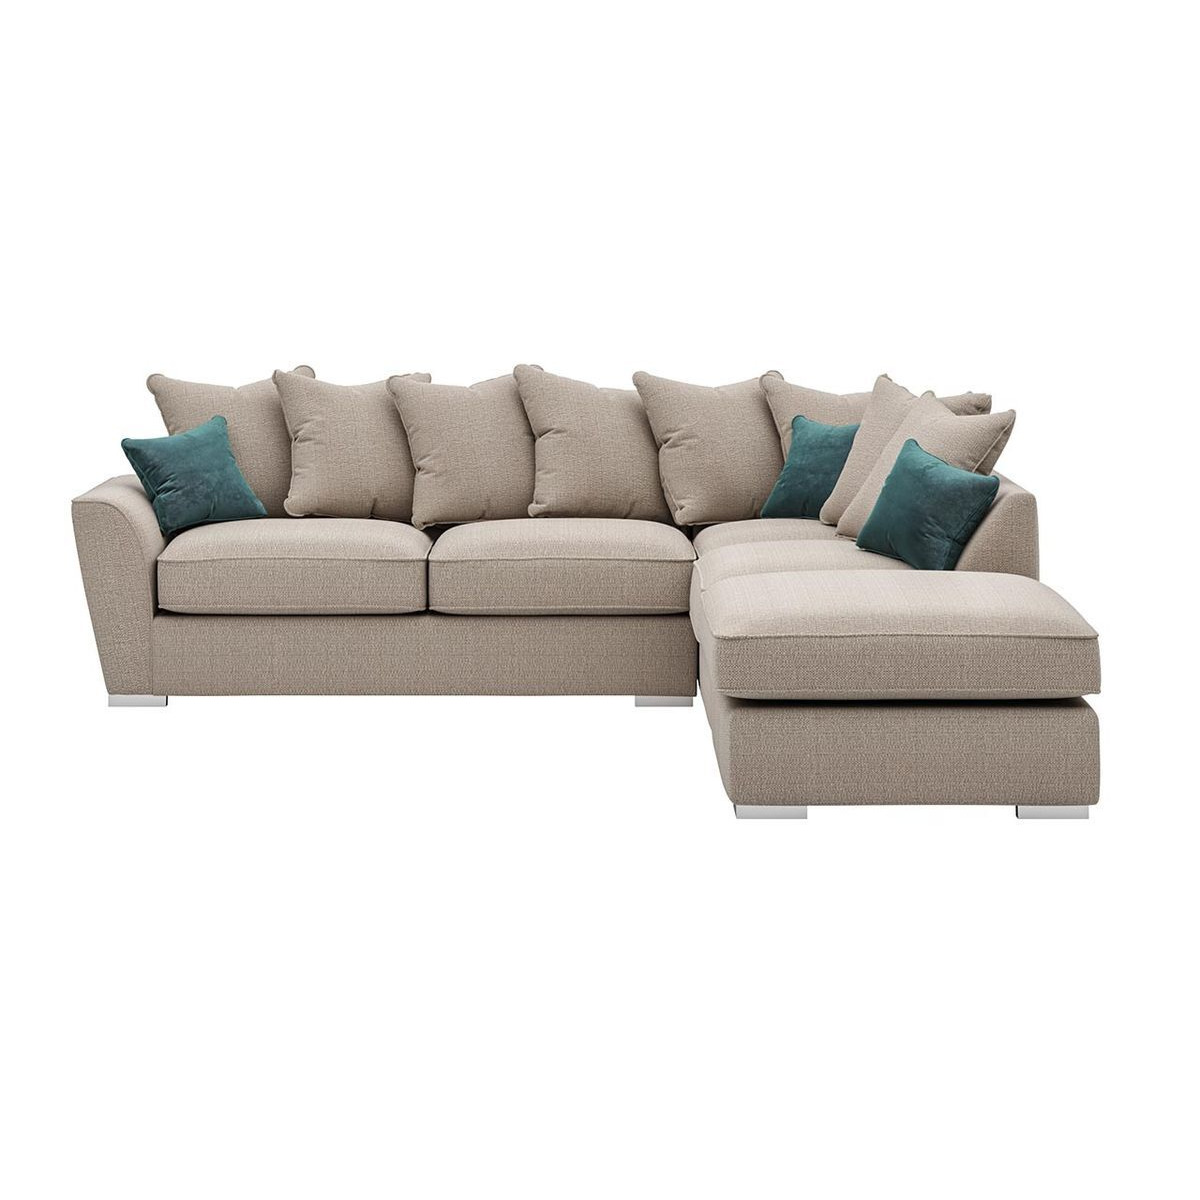 Majestic Right Hand Corner Sofa with Footstool and Loose Back Cushions, beige/azure - image 1